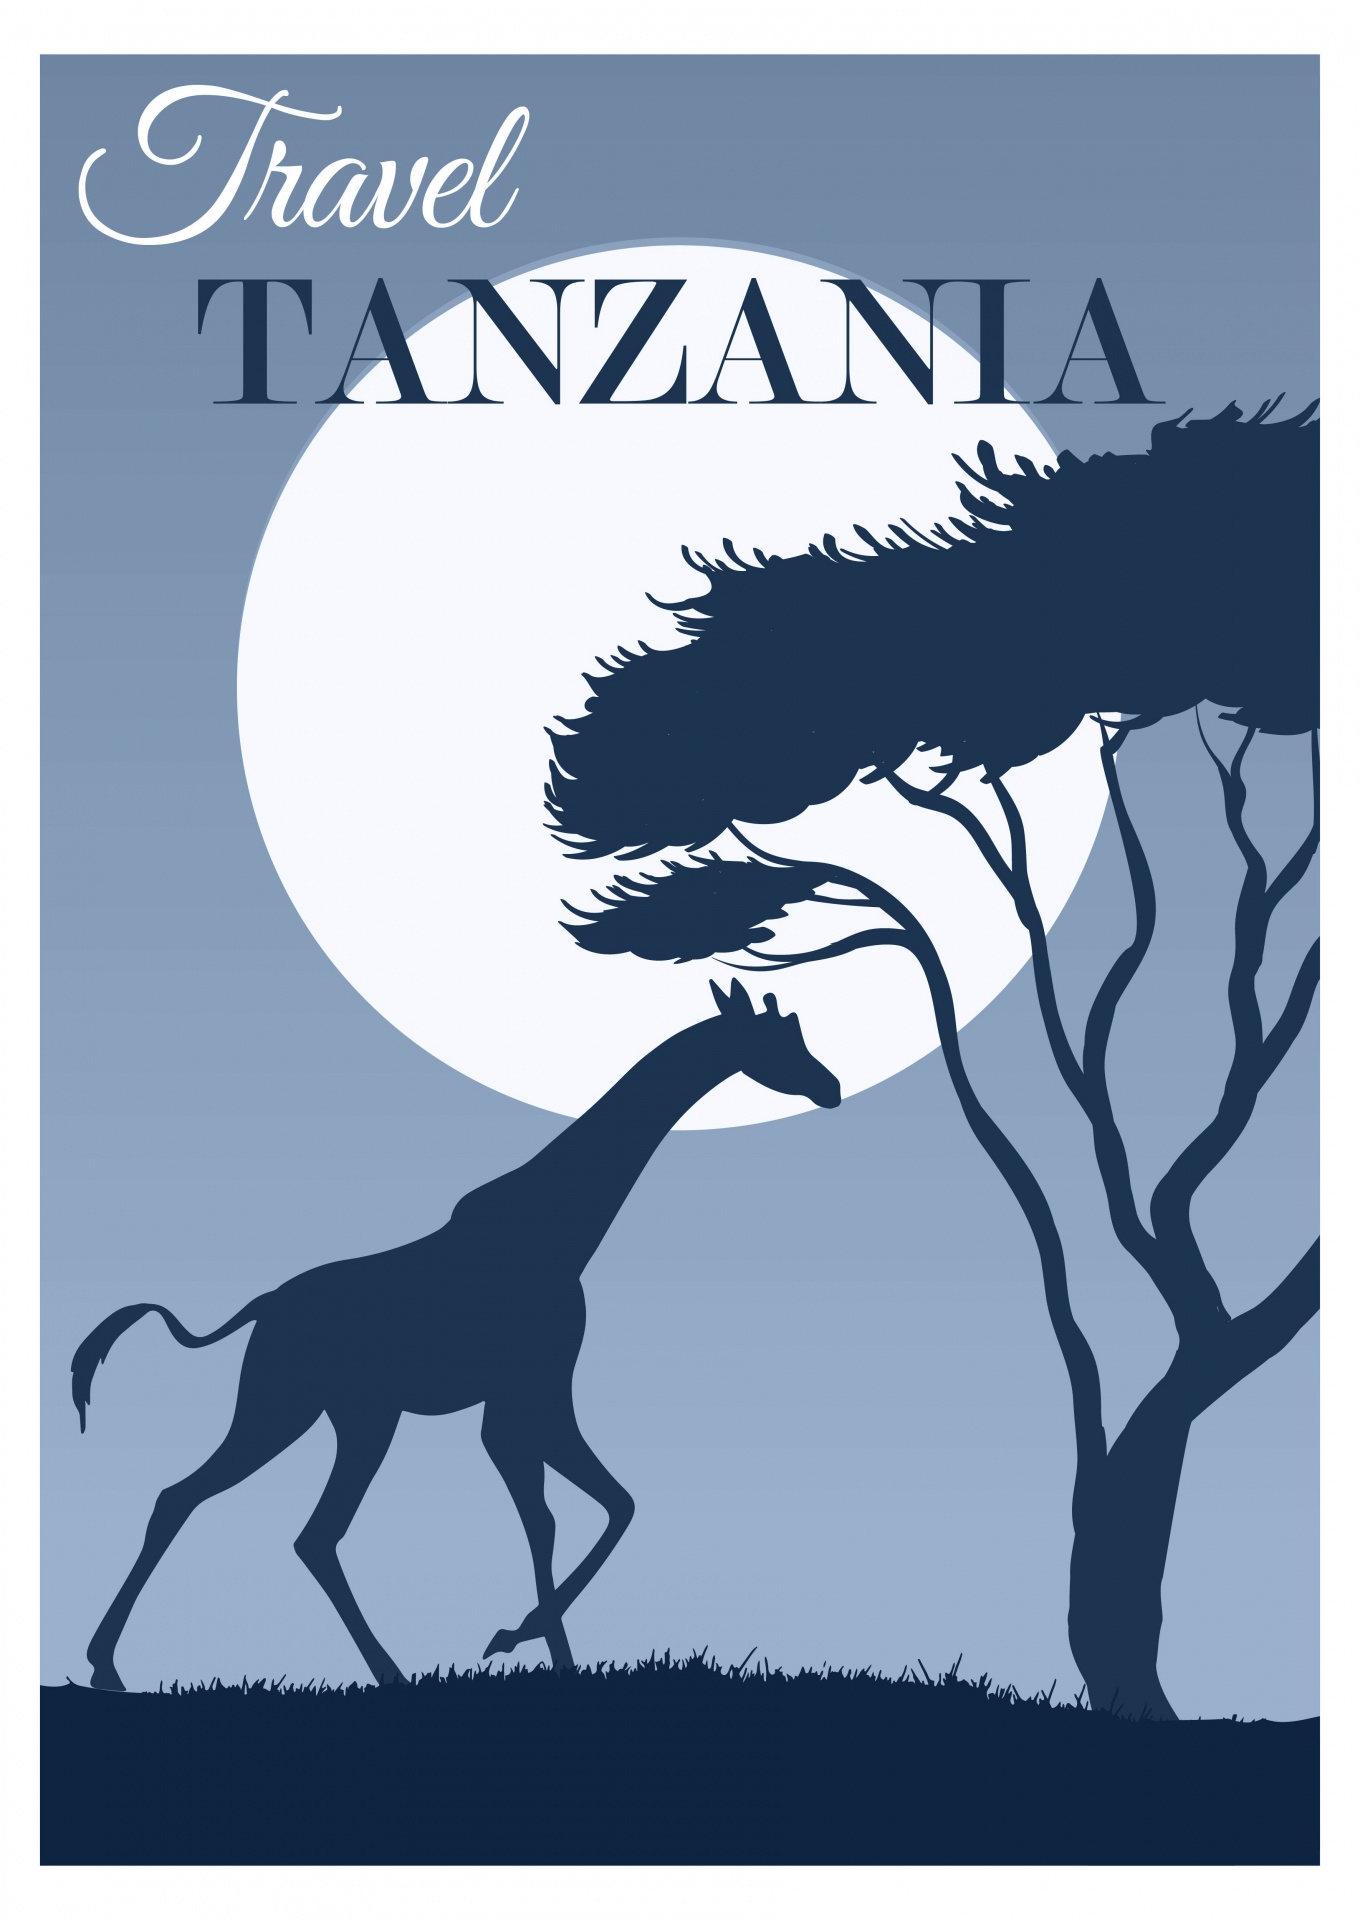 Modern retro, vintage style travel poster for Tanzania, Africa with moon, giraffe running silhouette and acacia tree vector digital illustration